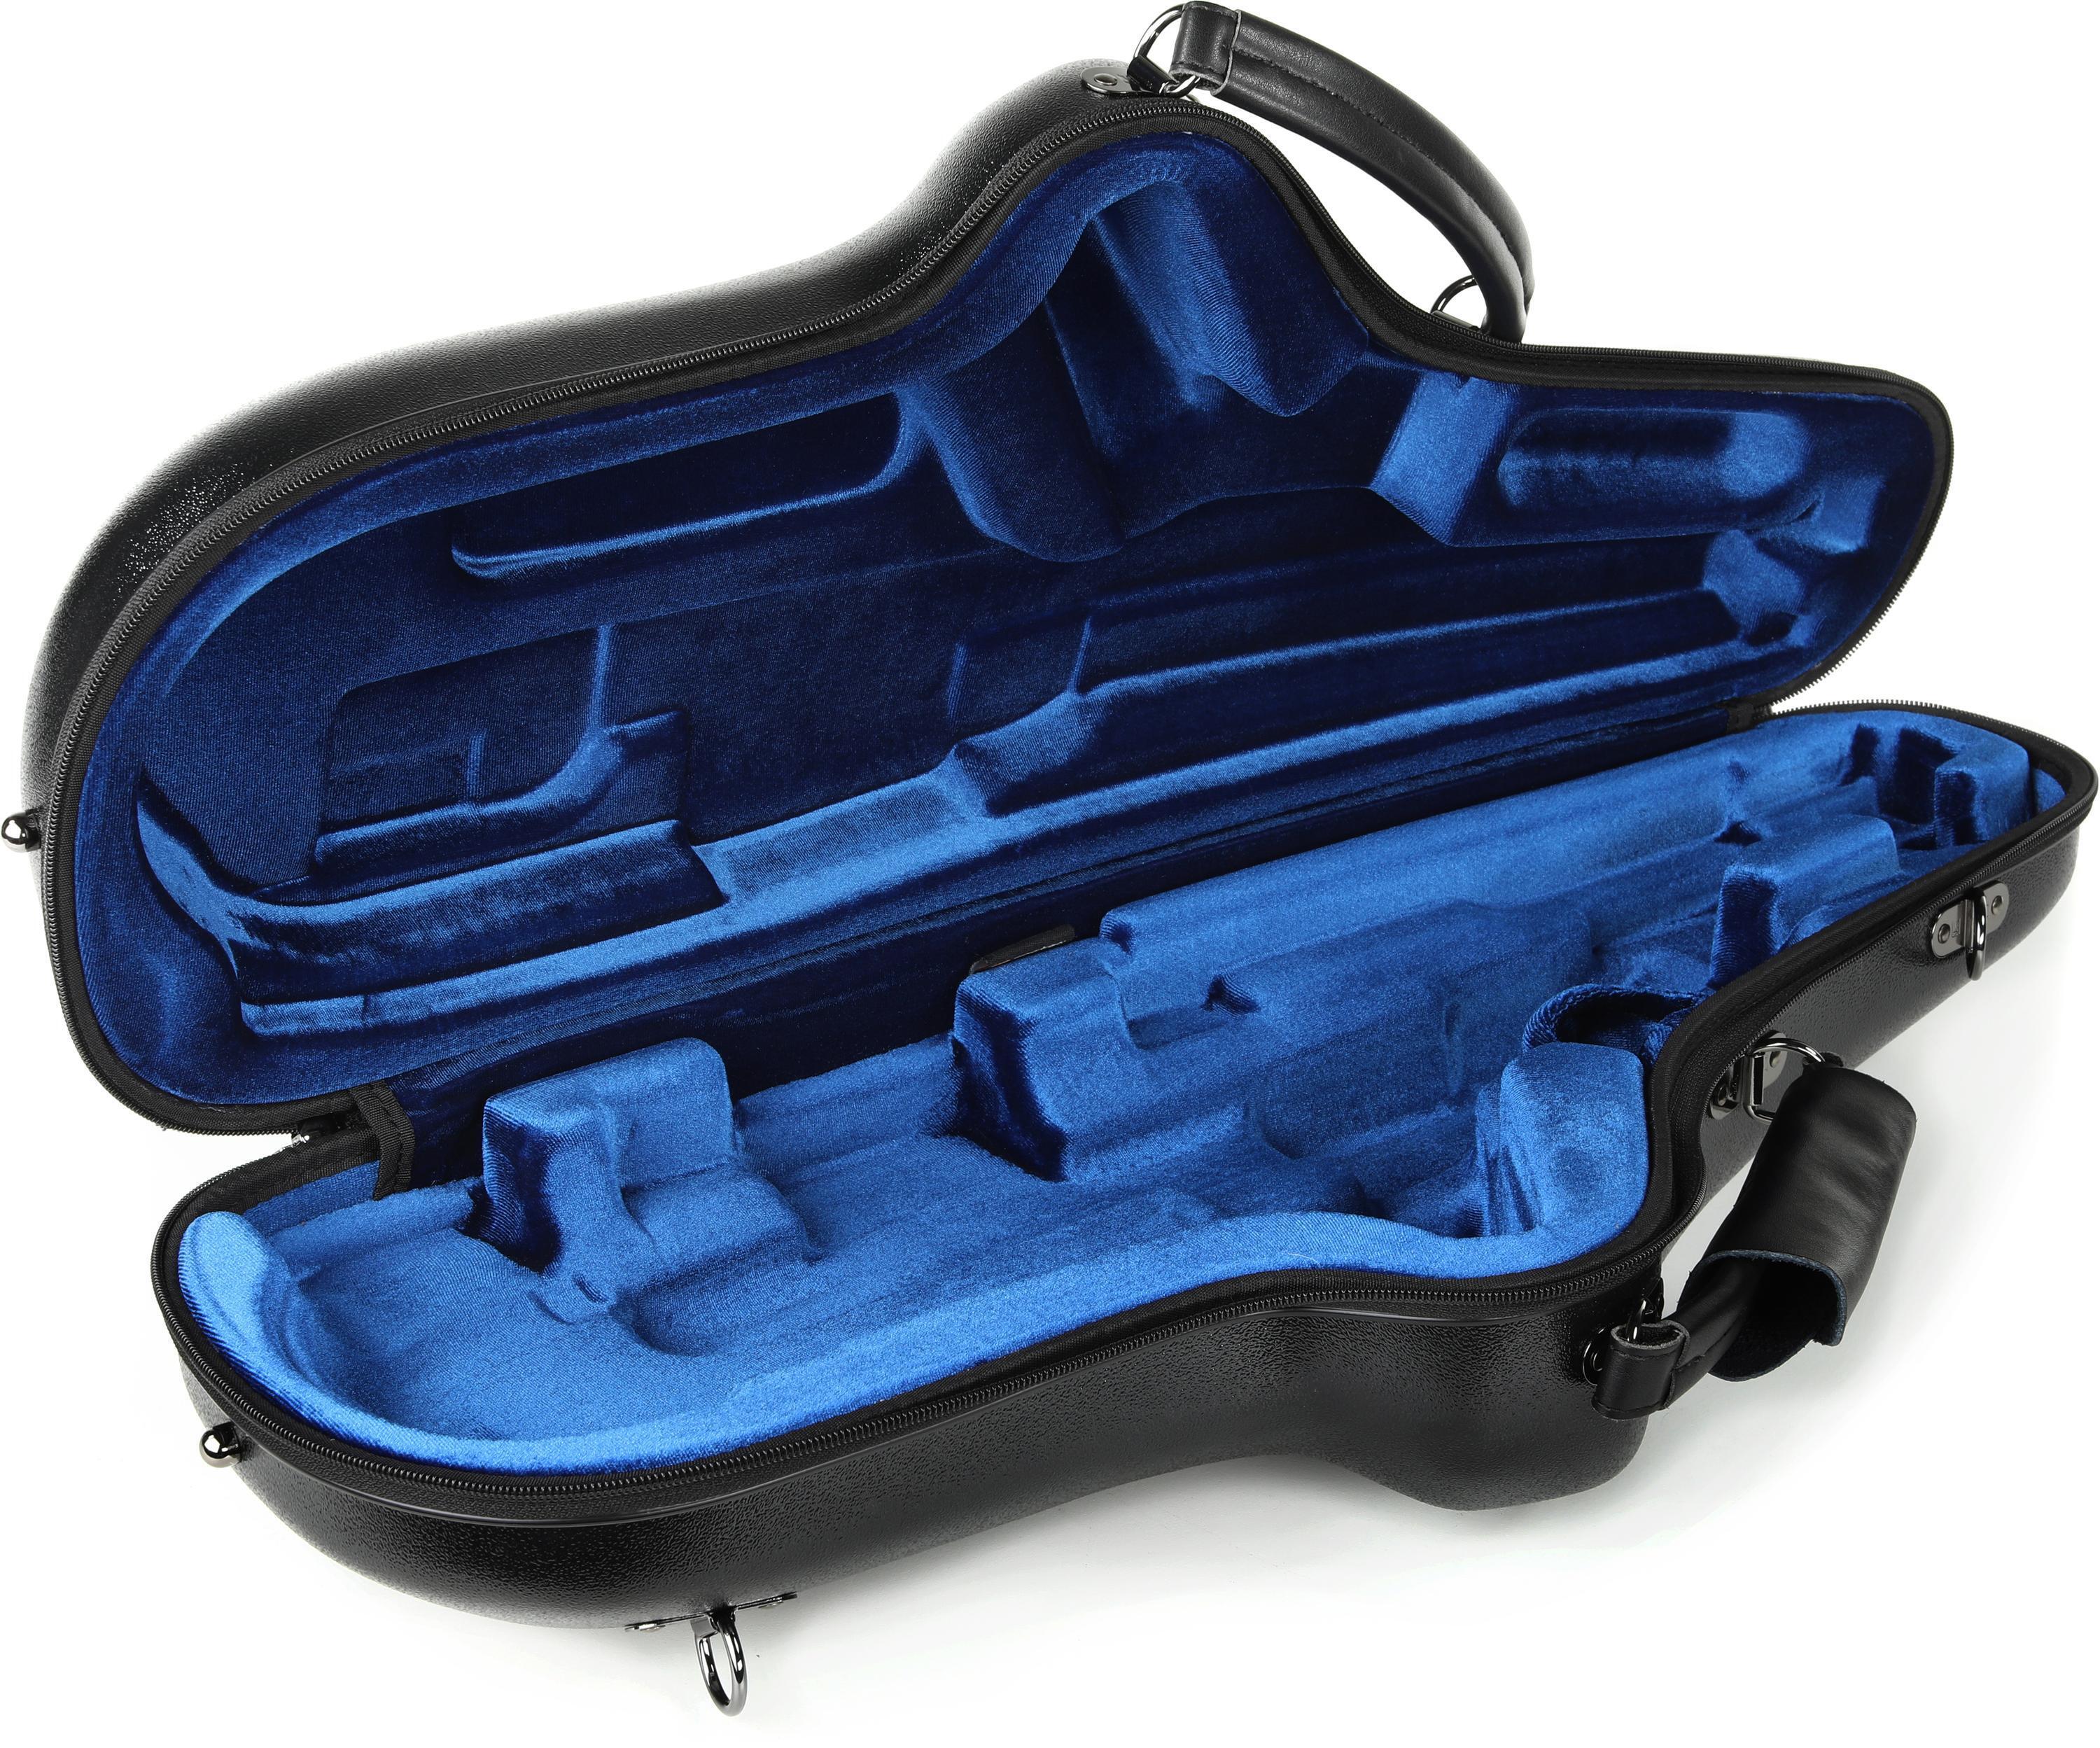 Large Ballistic Zippered Hard Case with Clip